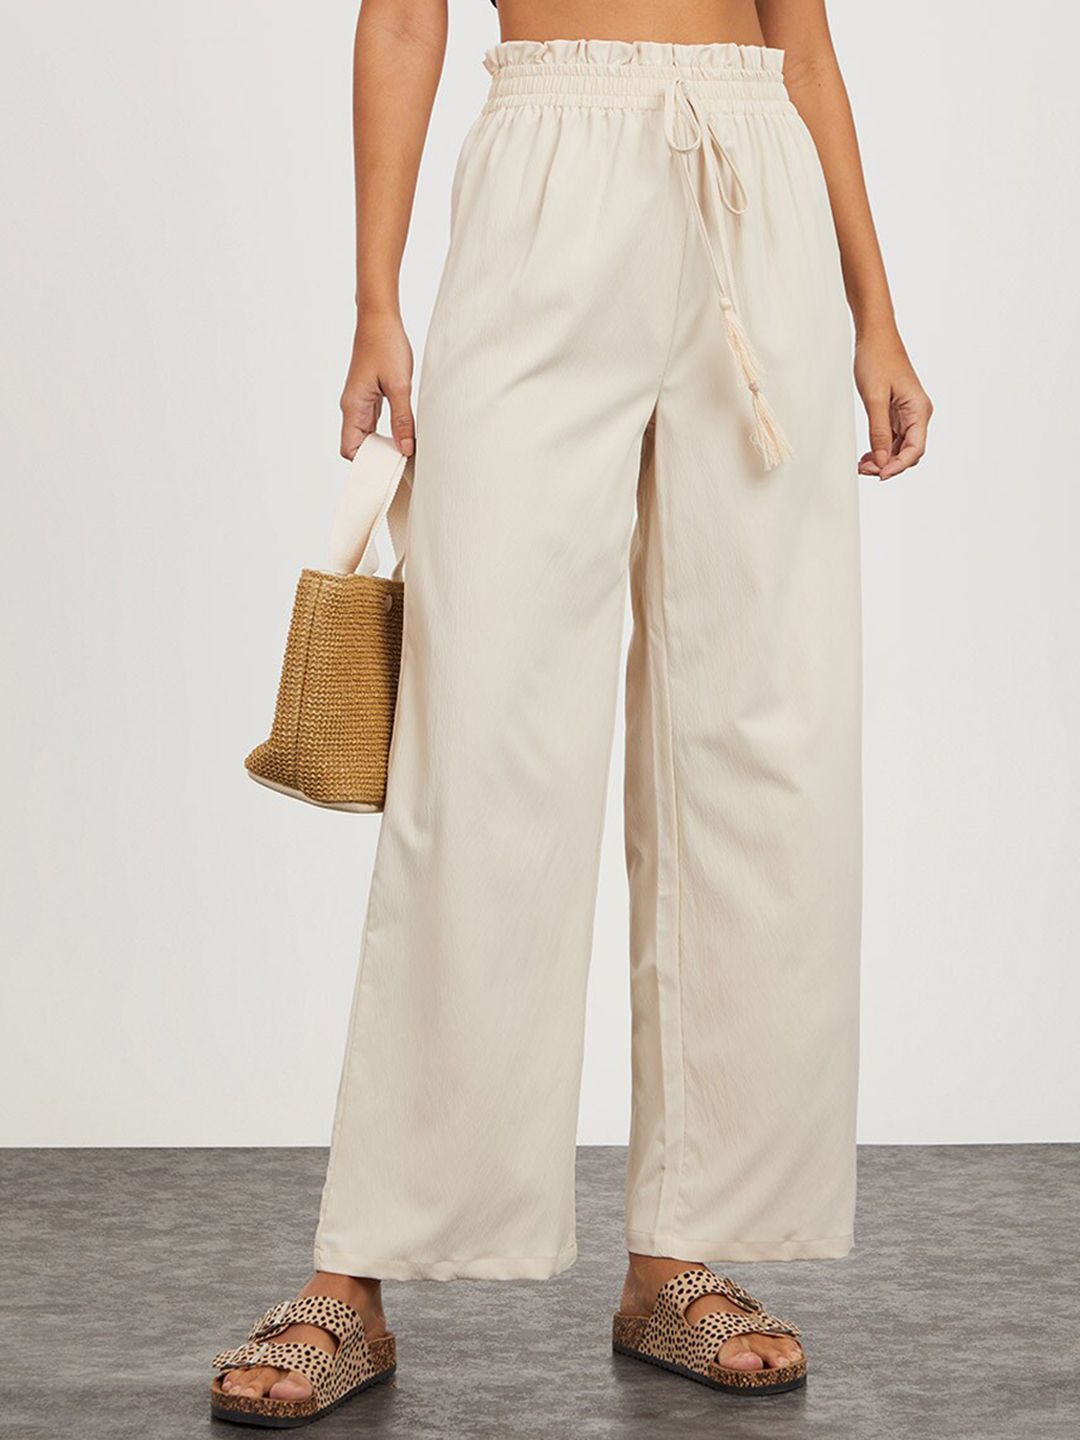 Styli Women Cream-Coloured High-Rise Trousers Price in India